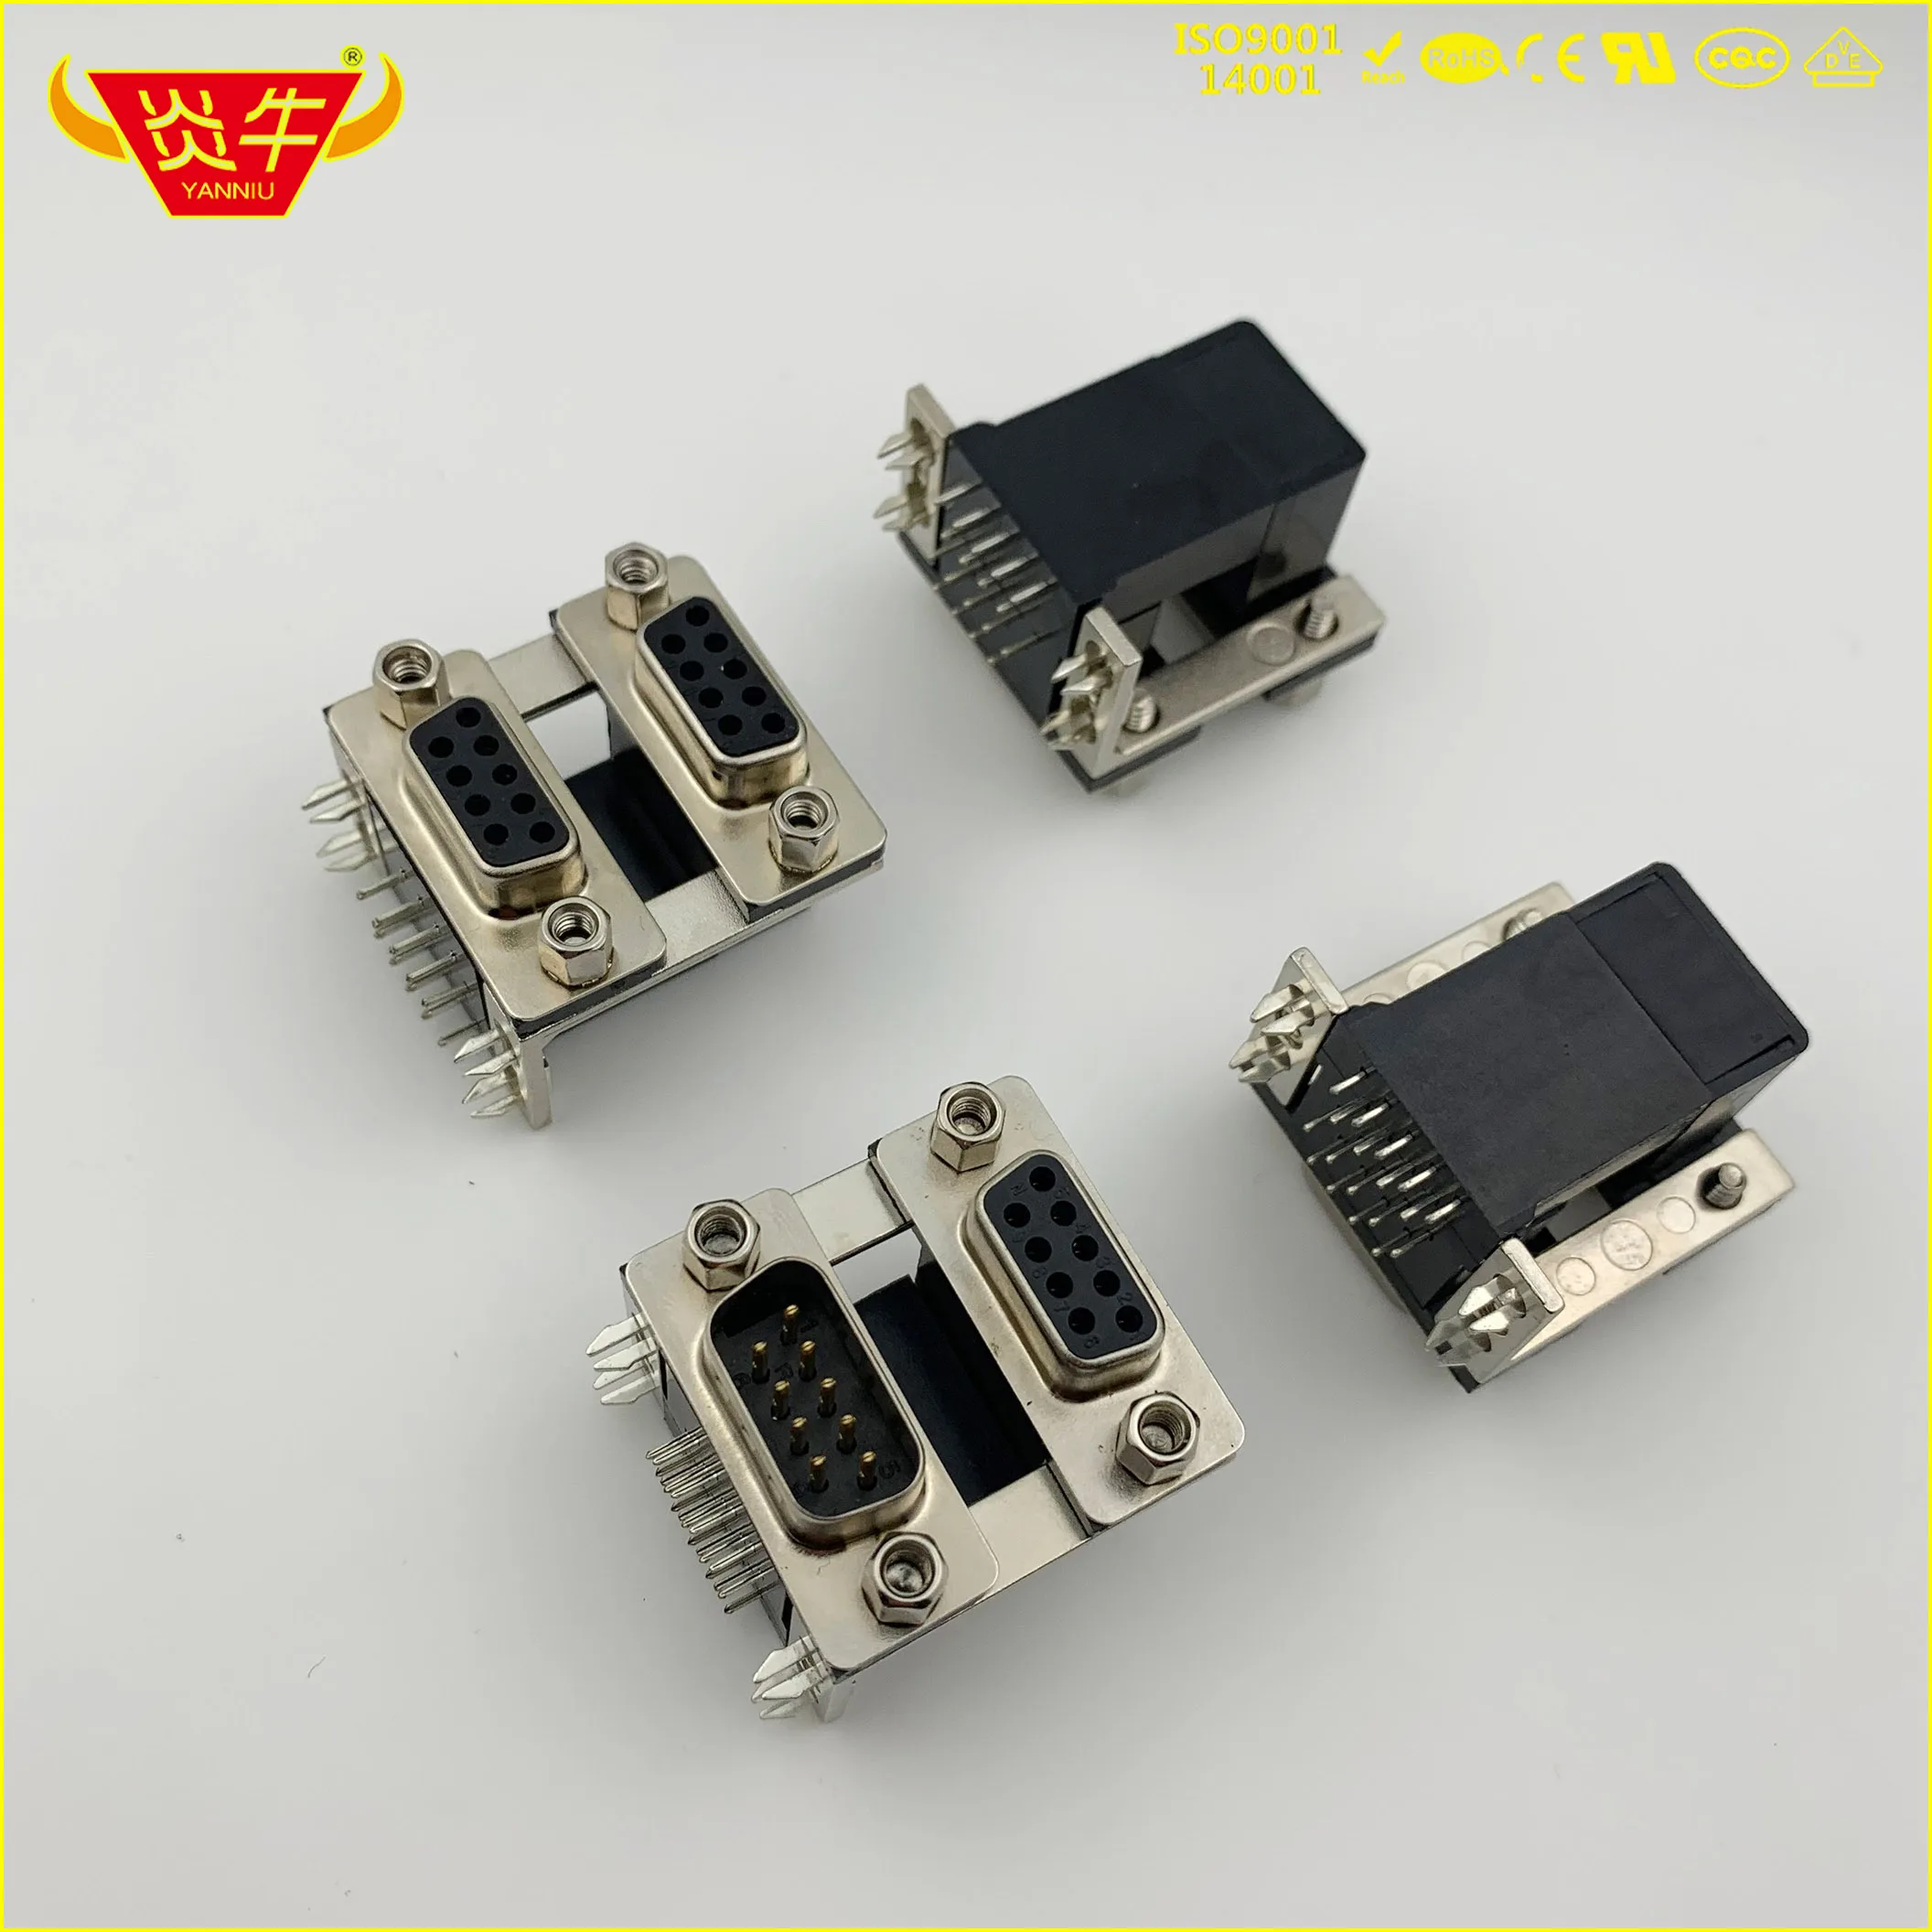 

Double Layer RS232 WITH SOCKET DR9Pin D-SUB SERIES FEMALE RIGHT ANGLE PCB CONNECTOR CONTACT PART OF THE GOLD-PLATED 3Au YANNIU